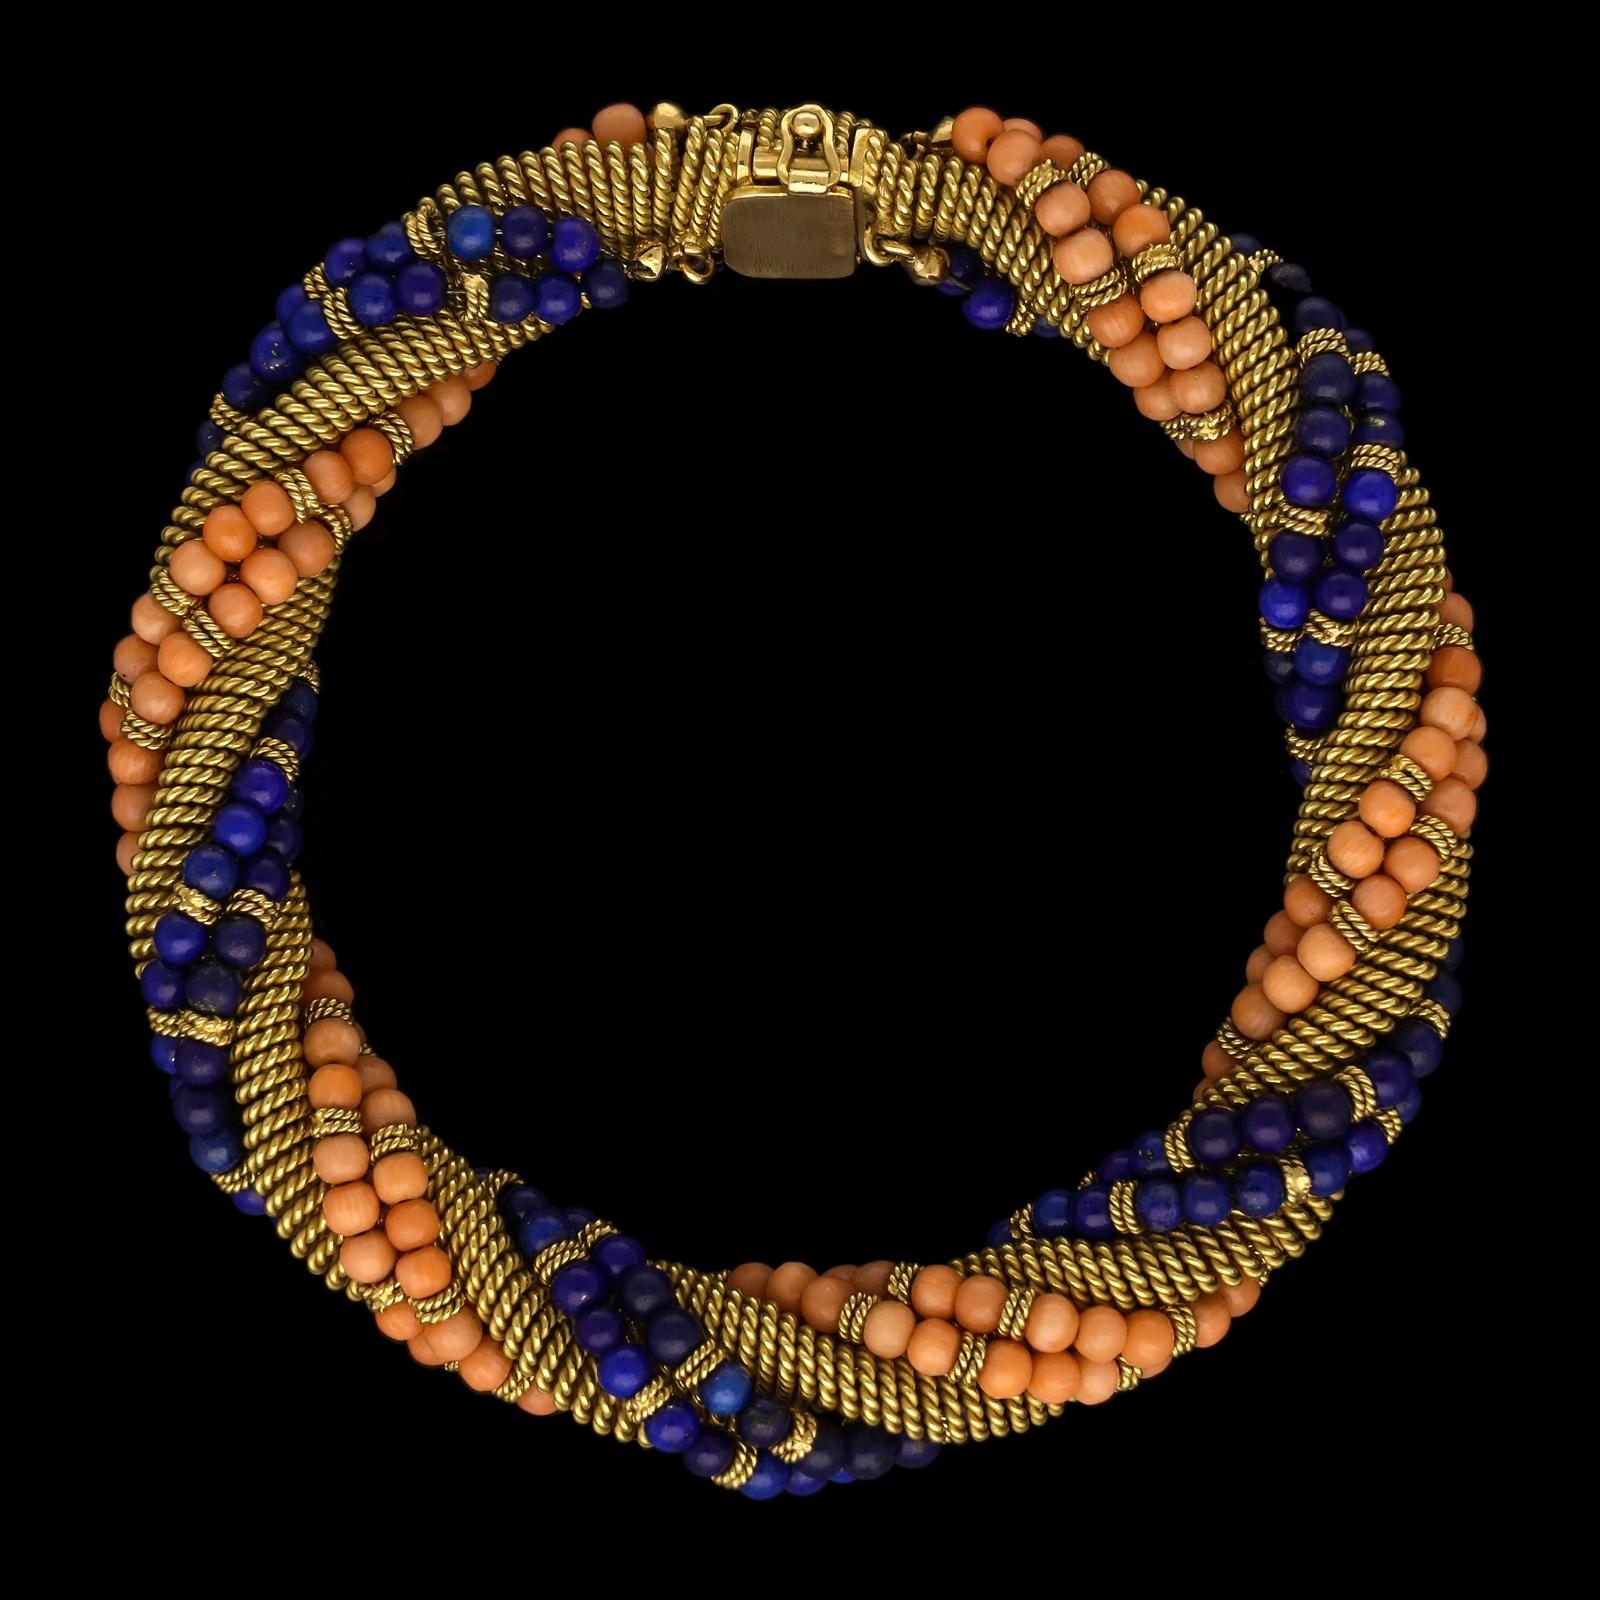 An unusual gold, coral and lapis lazuli bracelet by Bulgari c.1960, the bracelet formed of a woven gold strap twisted around and wrapped with a double row of round polished coral beads and another of matching lapis lazuli beads, the rows of beads